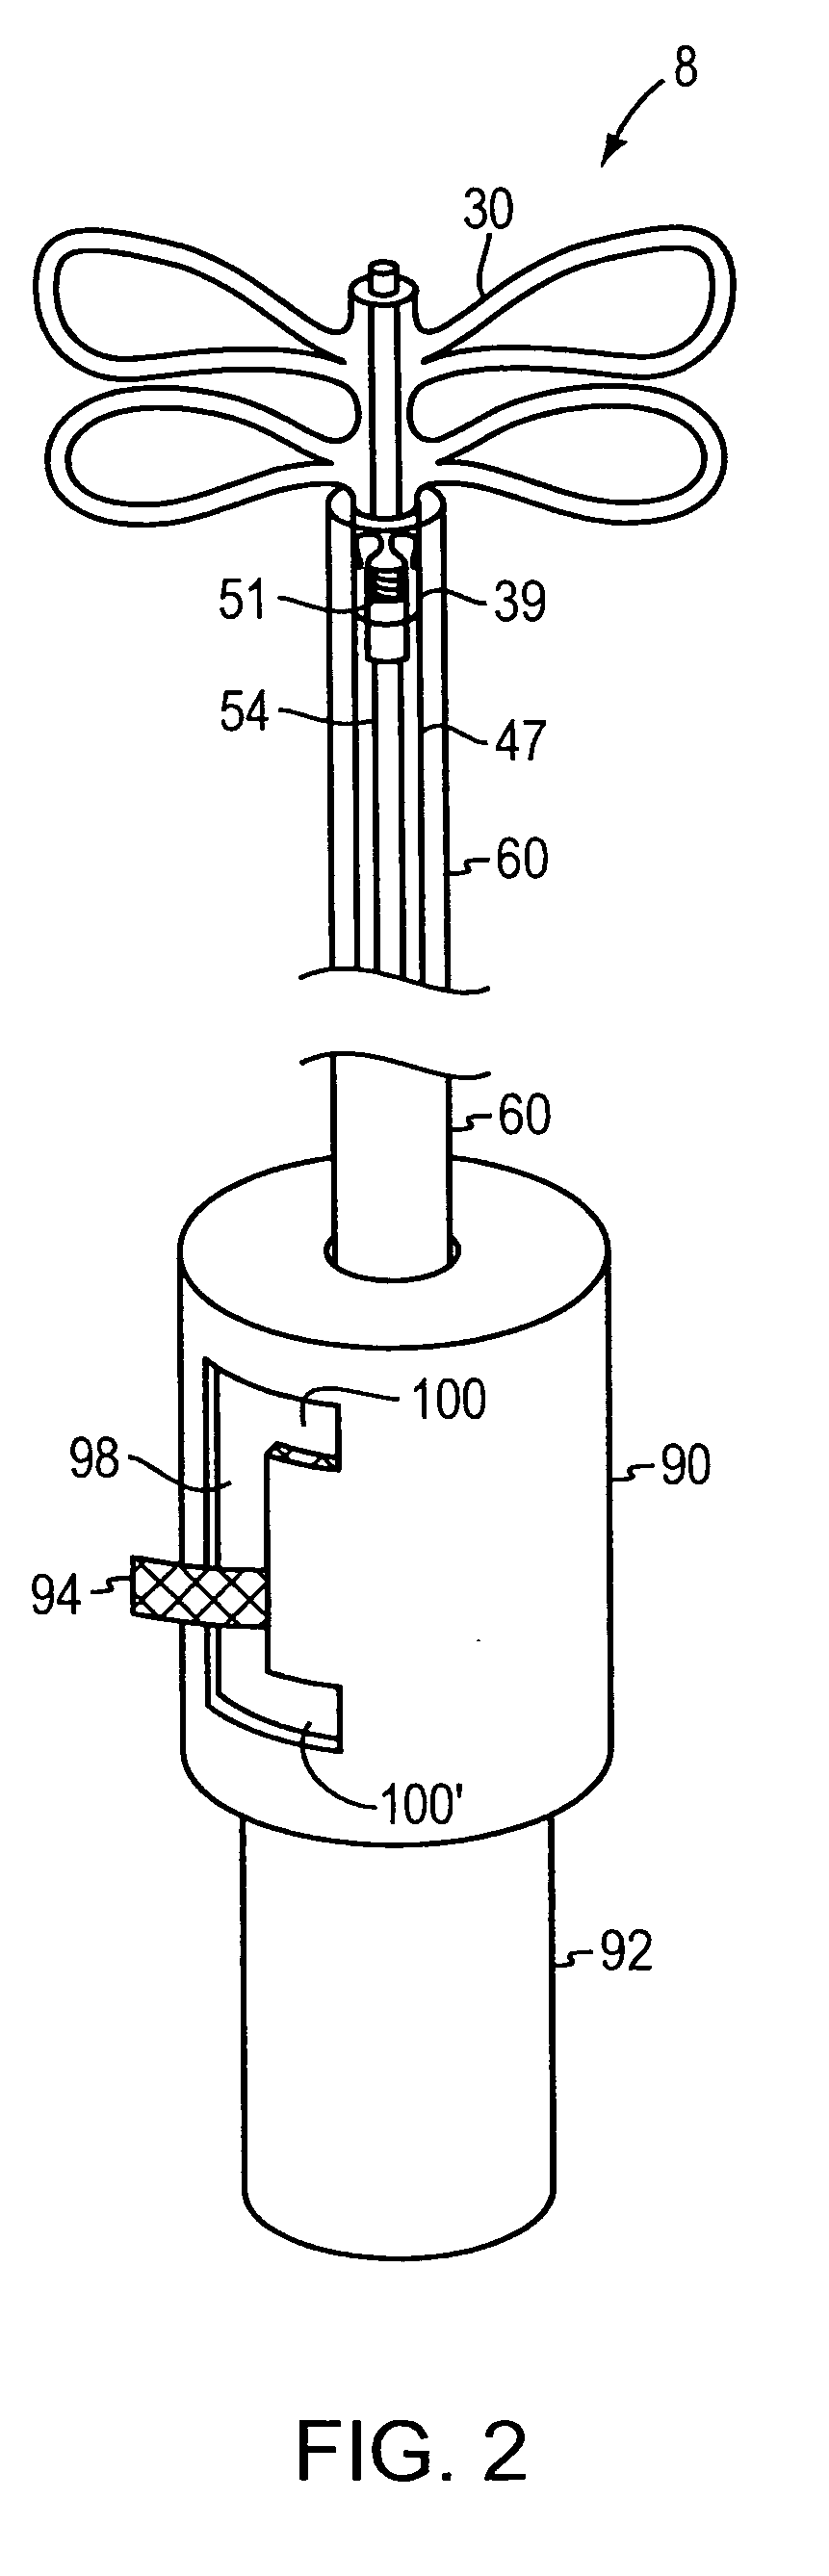 Delivery device for implant with dual attachment sites